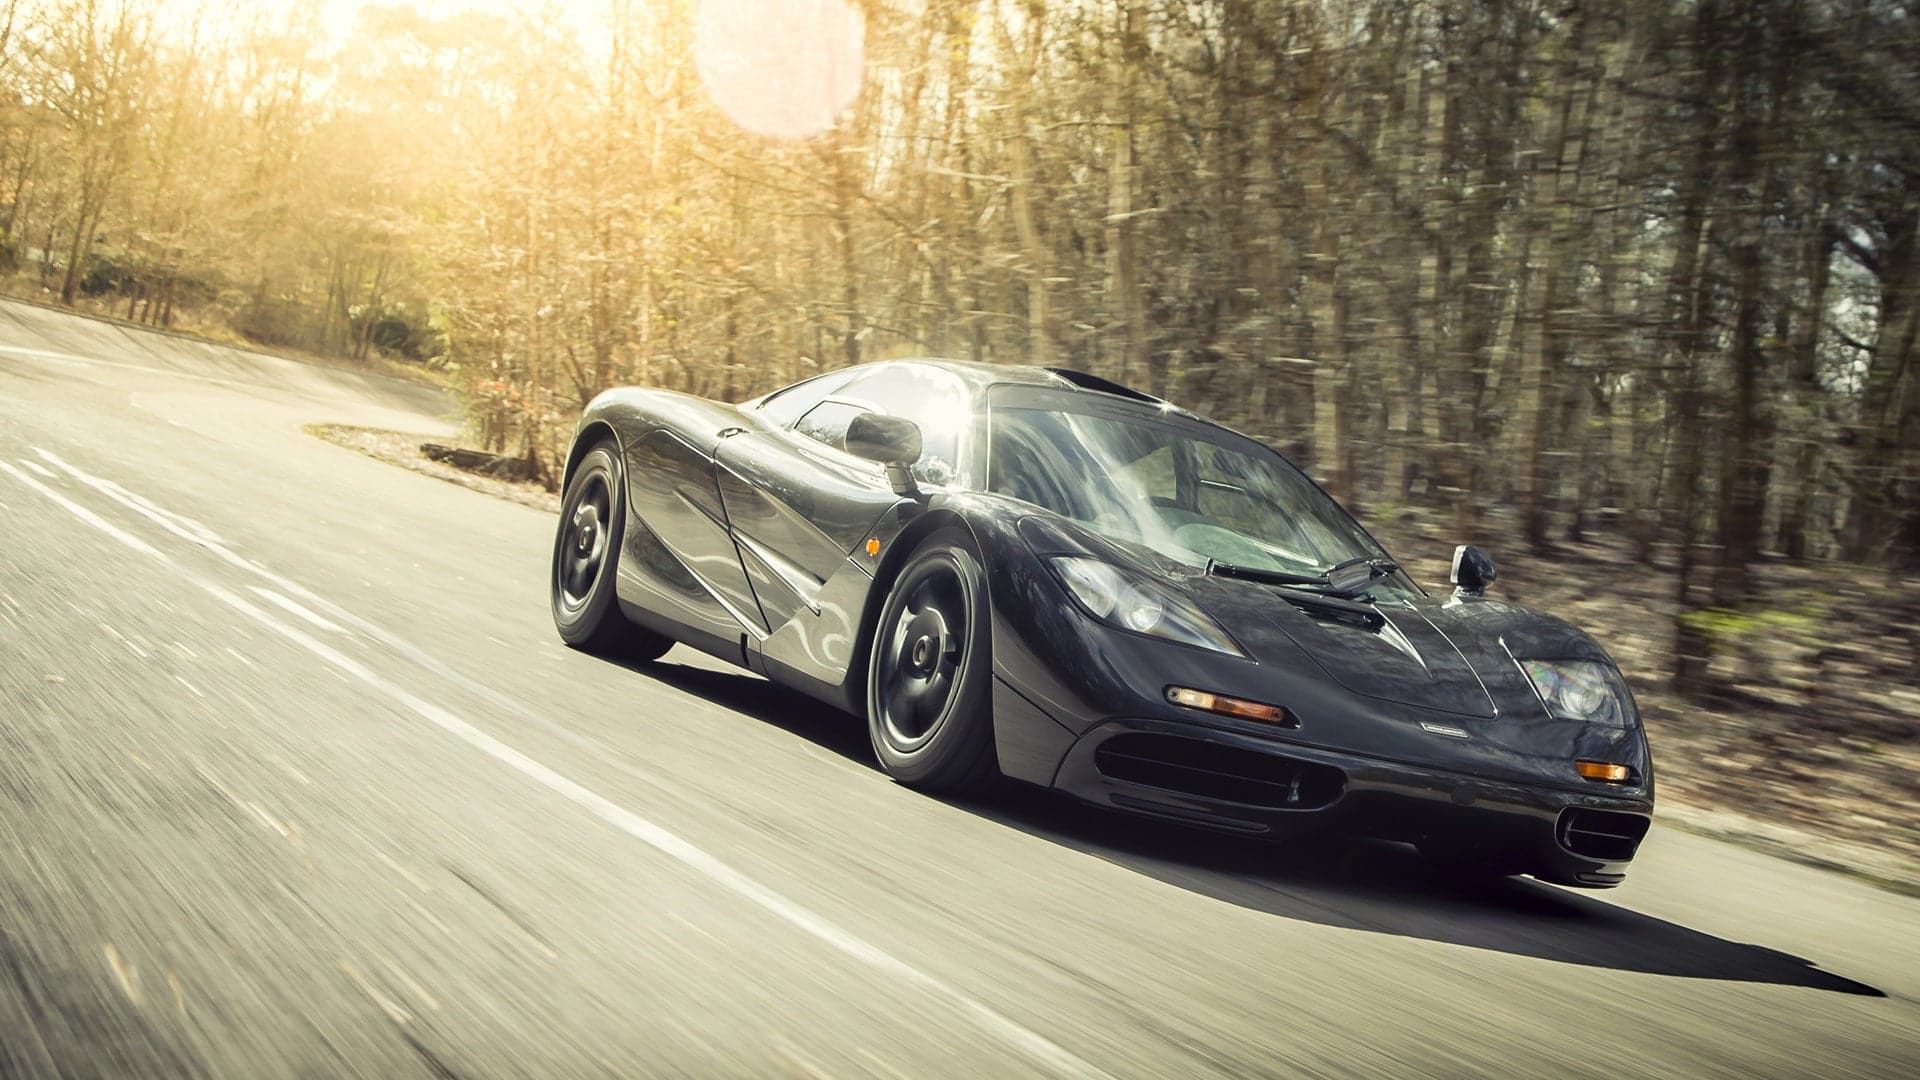 Is the McLaren F1 Really the Greatest Supercar Ever?